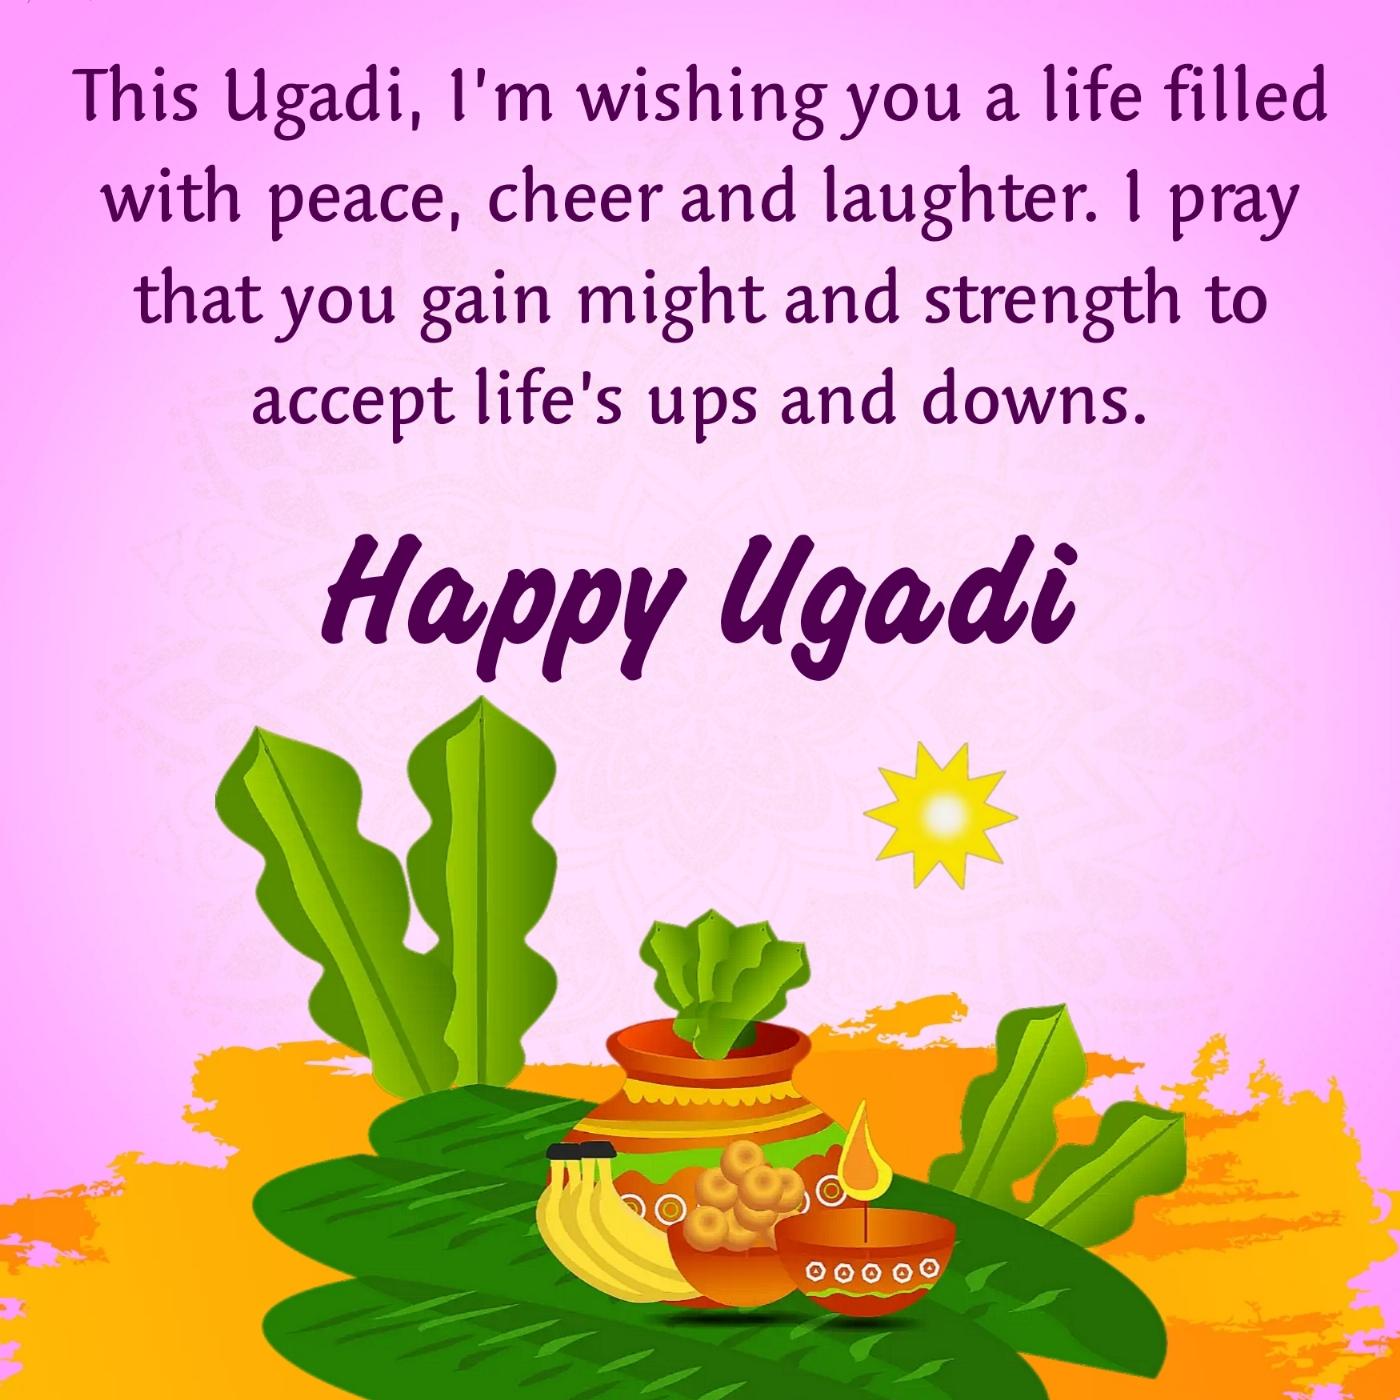 This Ugadi Im wishing you a life filled with peace